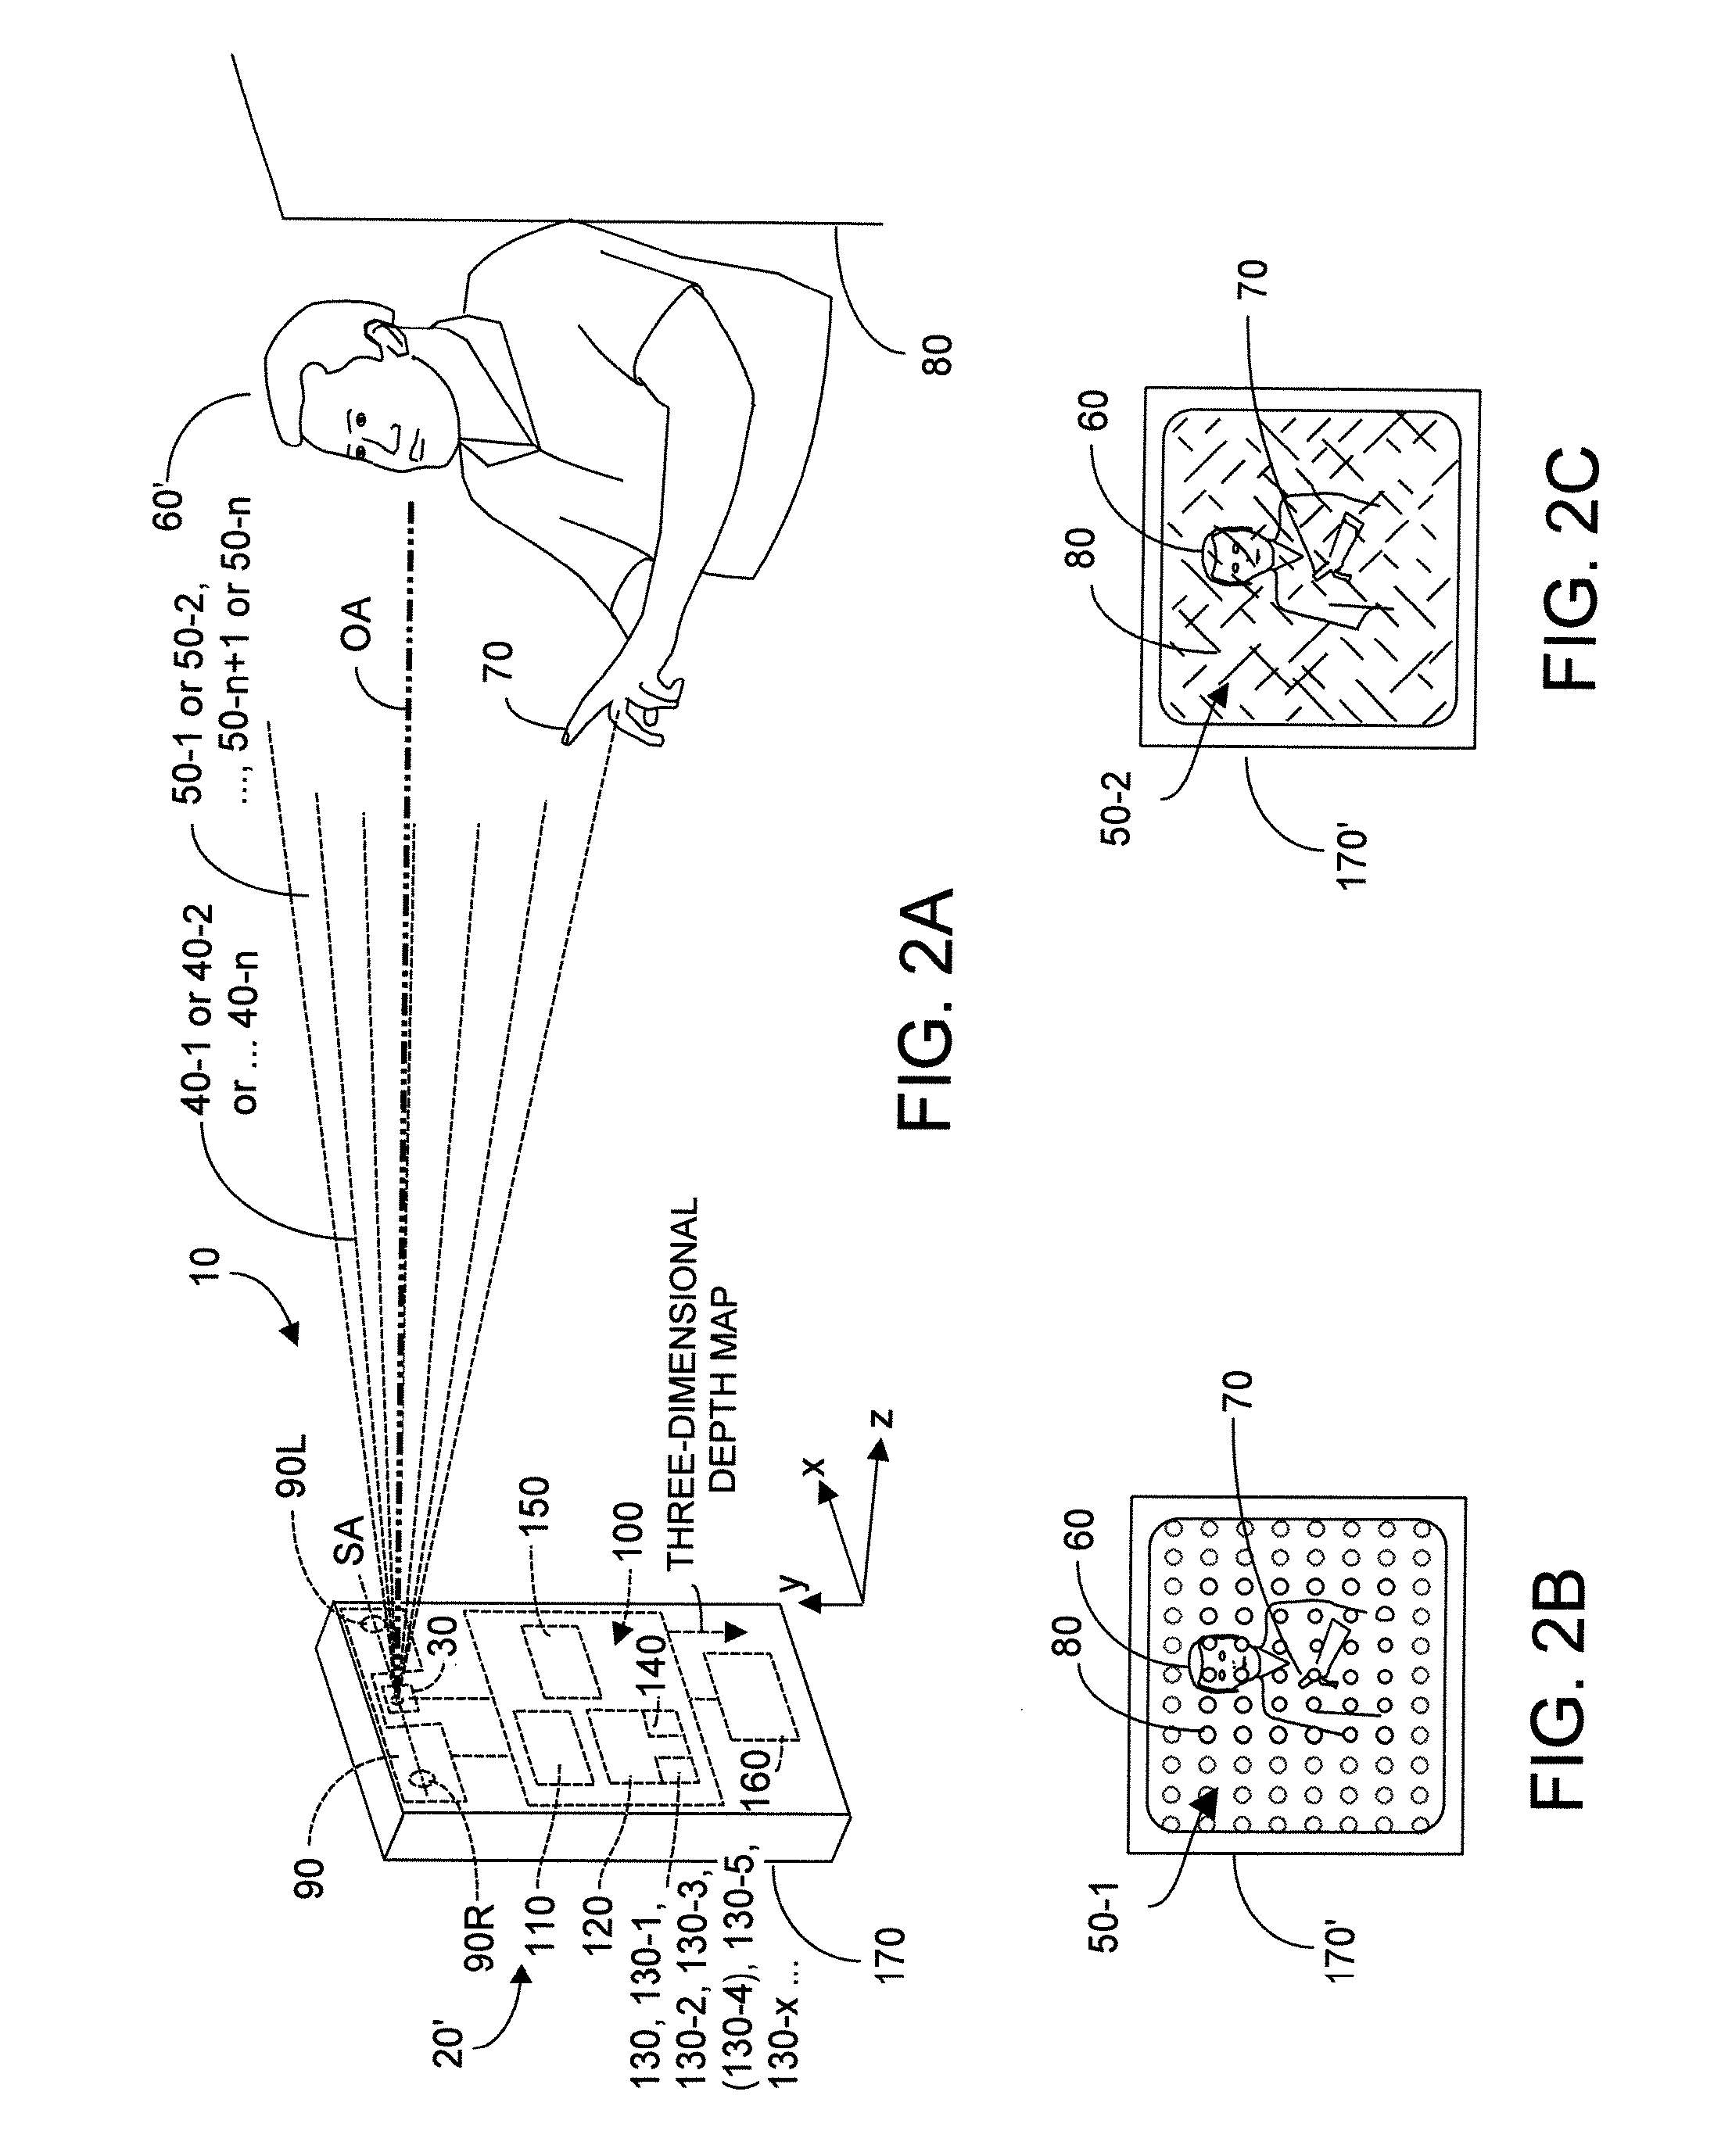 Dynamically reconfigurable optical pattern generator module useable with a system to rapidly reconstruct three-dimensional data